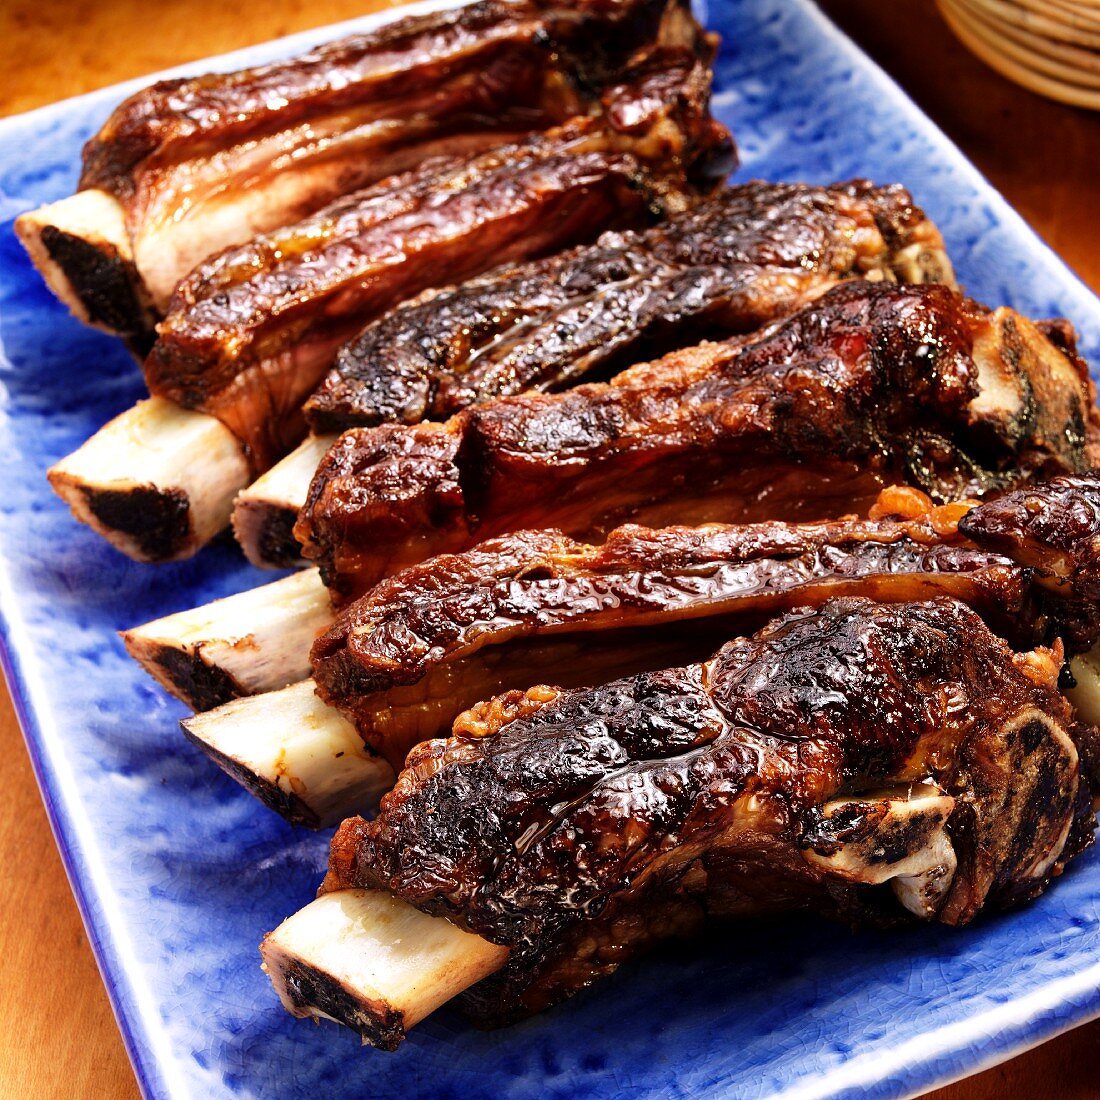 Platter of Roasted Beef Ribs